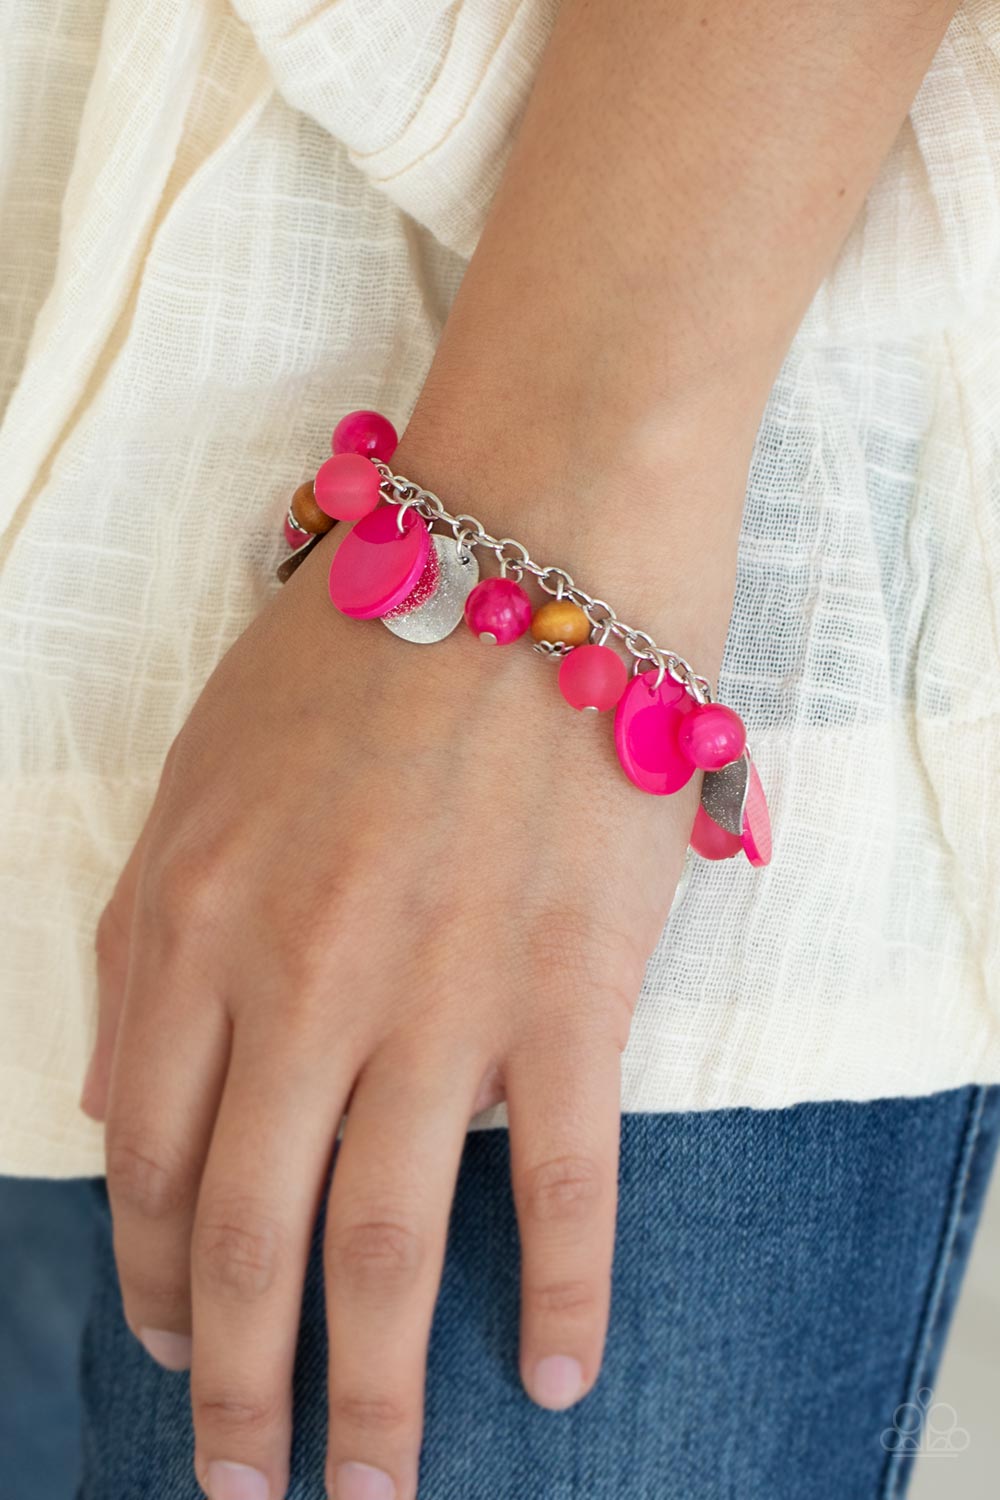 Infused with wooden beads and silver discs, an earthy collection of glassy, opaque, and shell-like Raspberry Sorbet beads swing from the wrist, creating a springtime inspired fringe. Features an adjustable clasp closure.